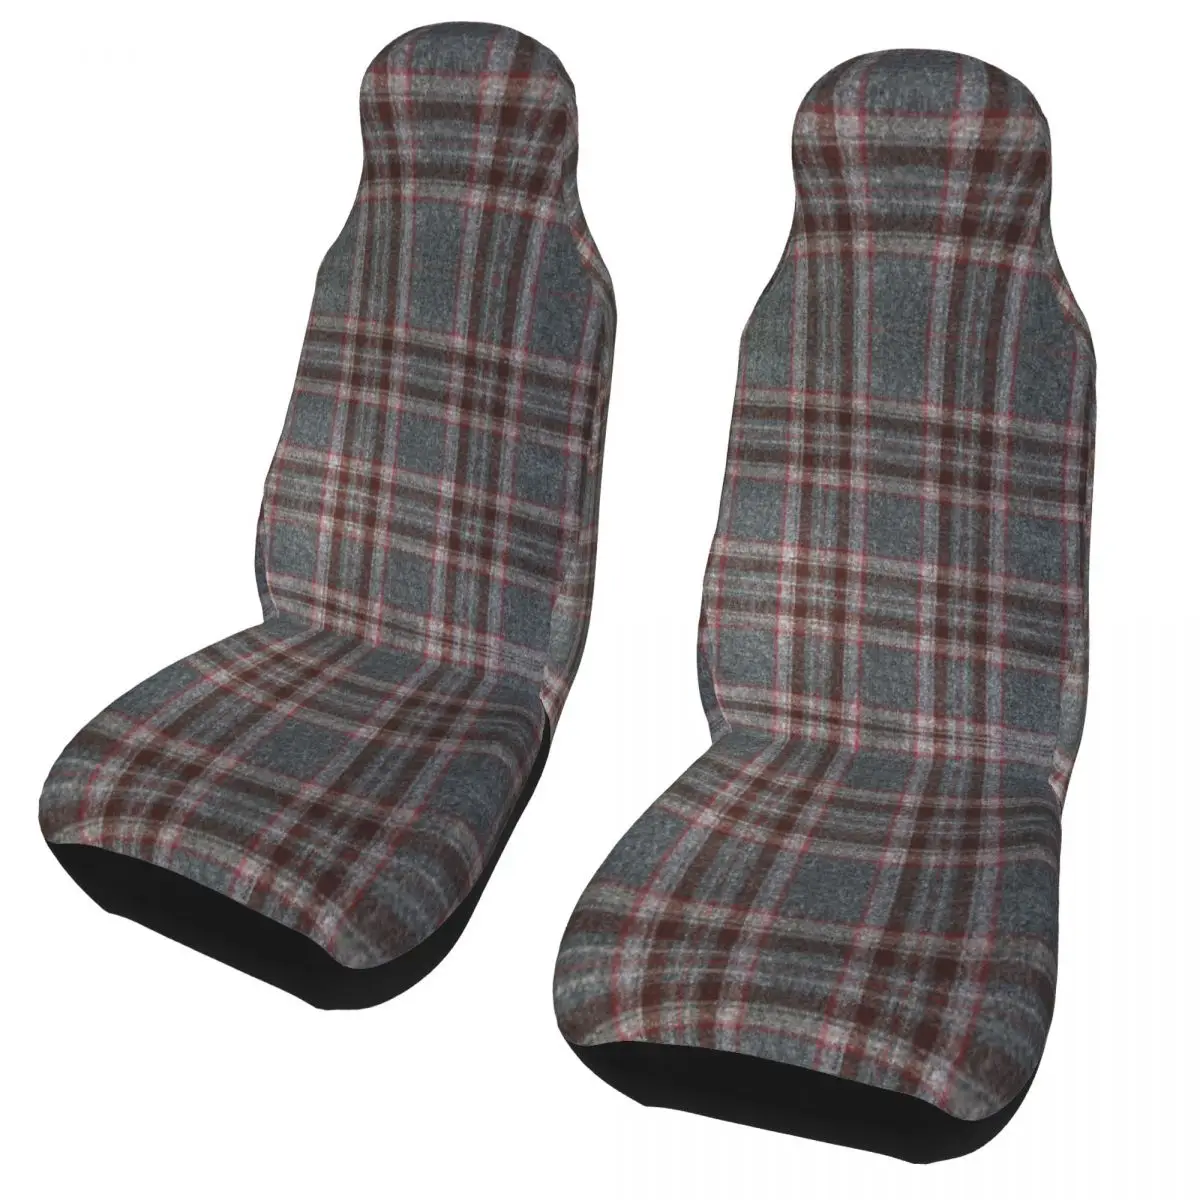 

Grey Tartan Car Seat Cover Plaid Gingham Scottish Tartans Kilt Seat Covers Fit for Cars SUV Auto Protector Accessories 2 PCS